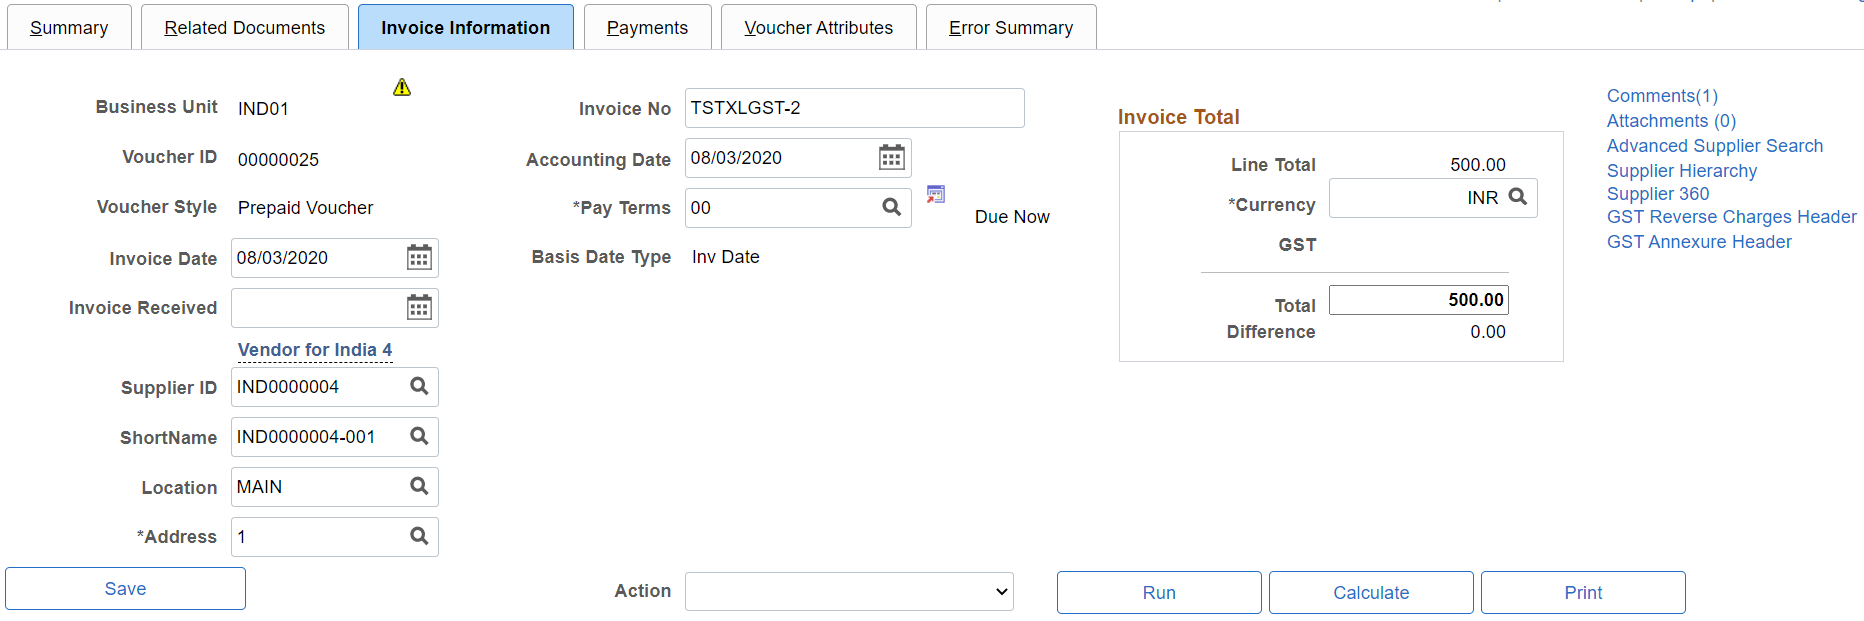 Invoice Information page for prepaid voucher style (1 of 2)